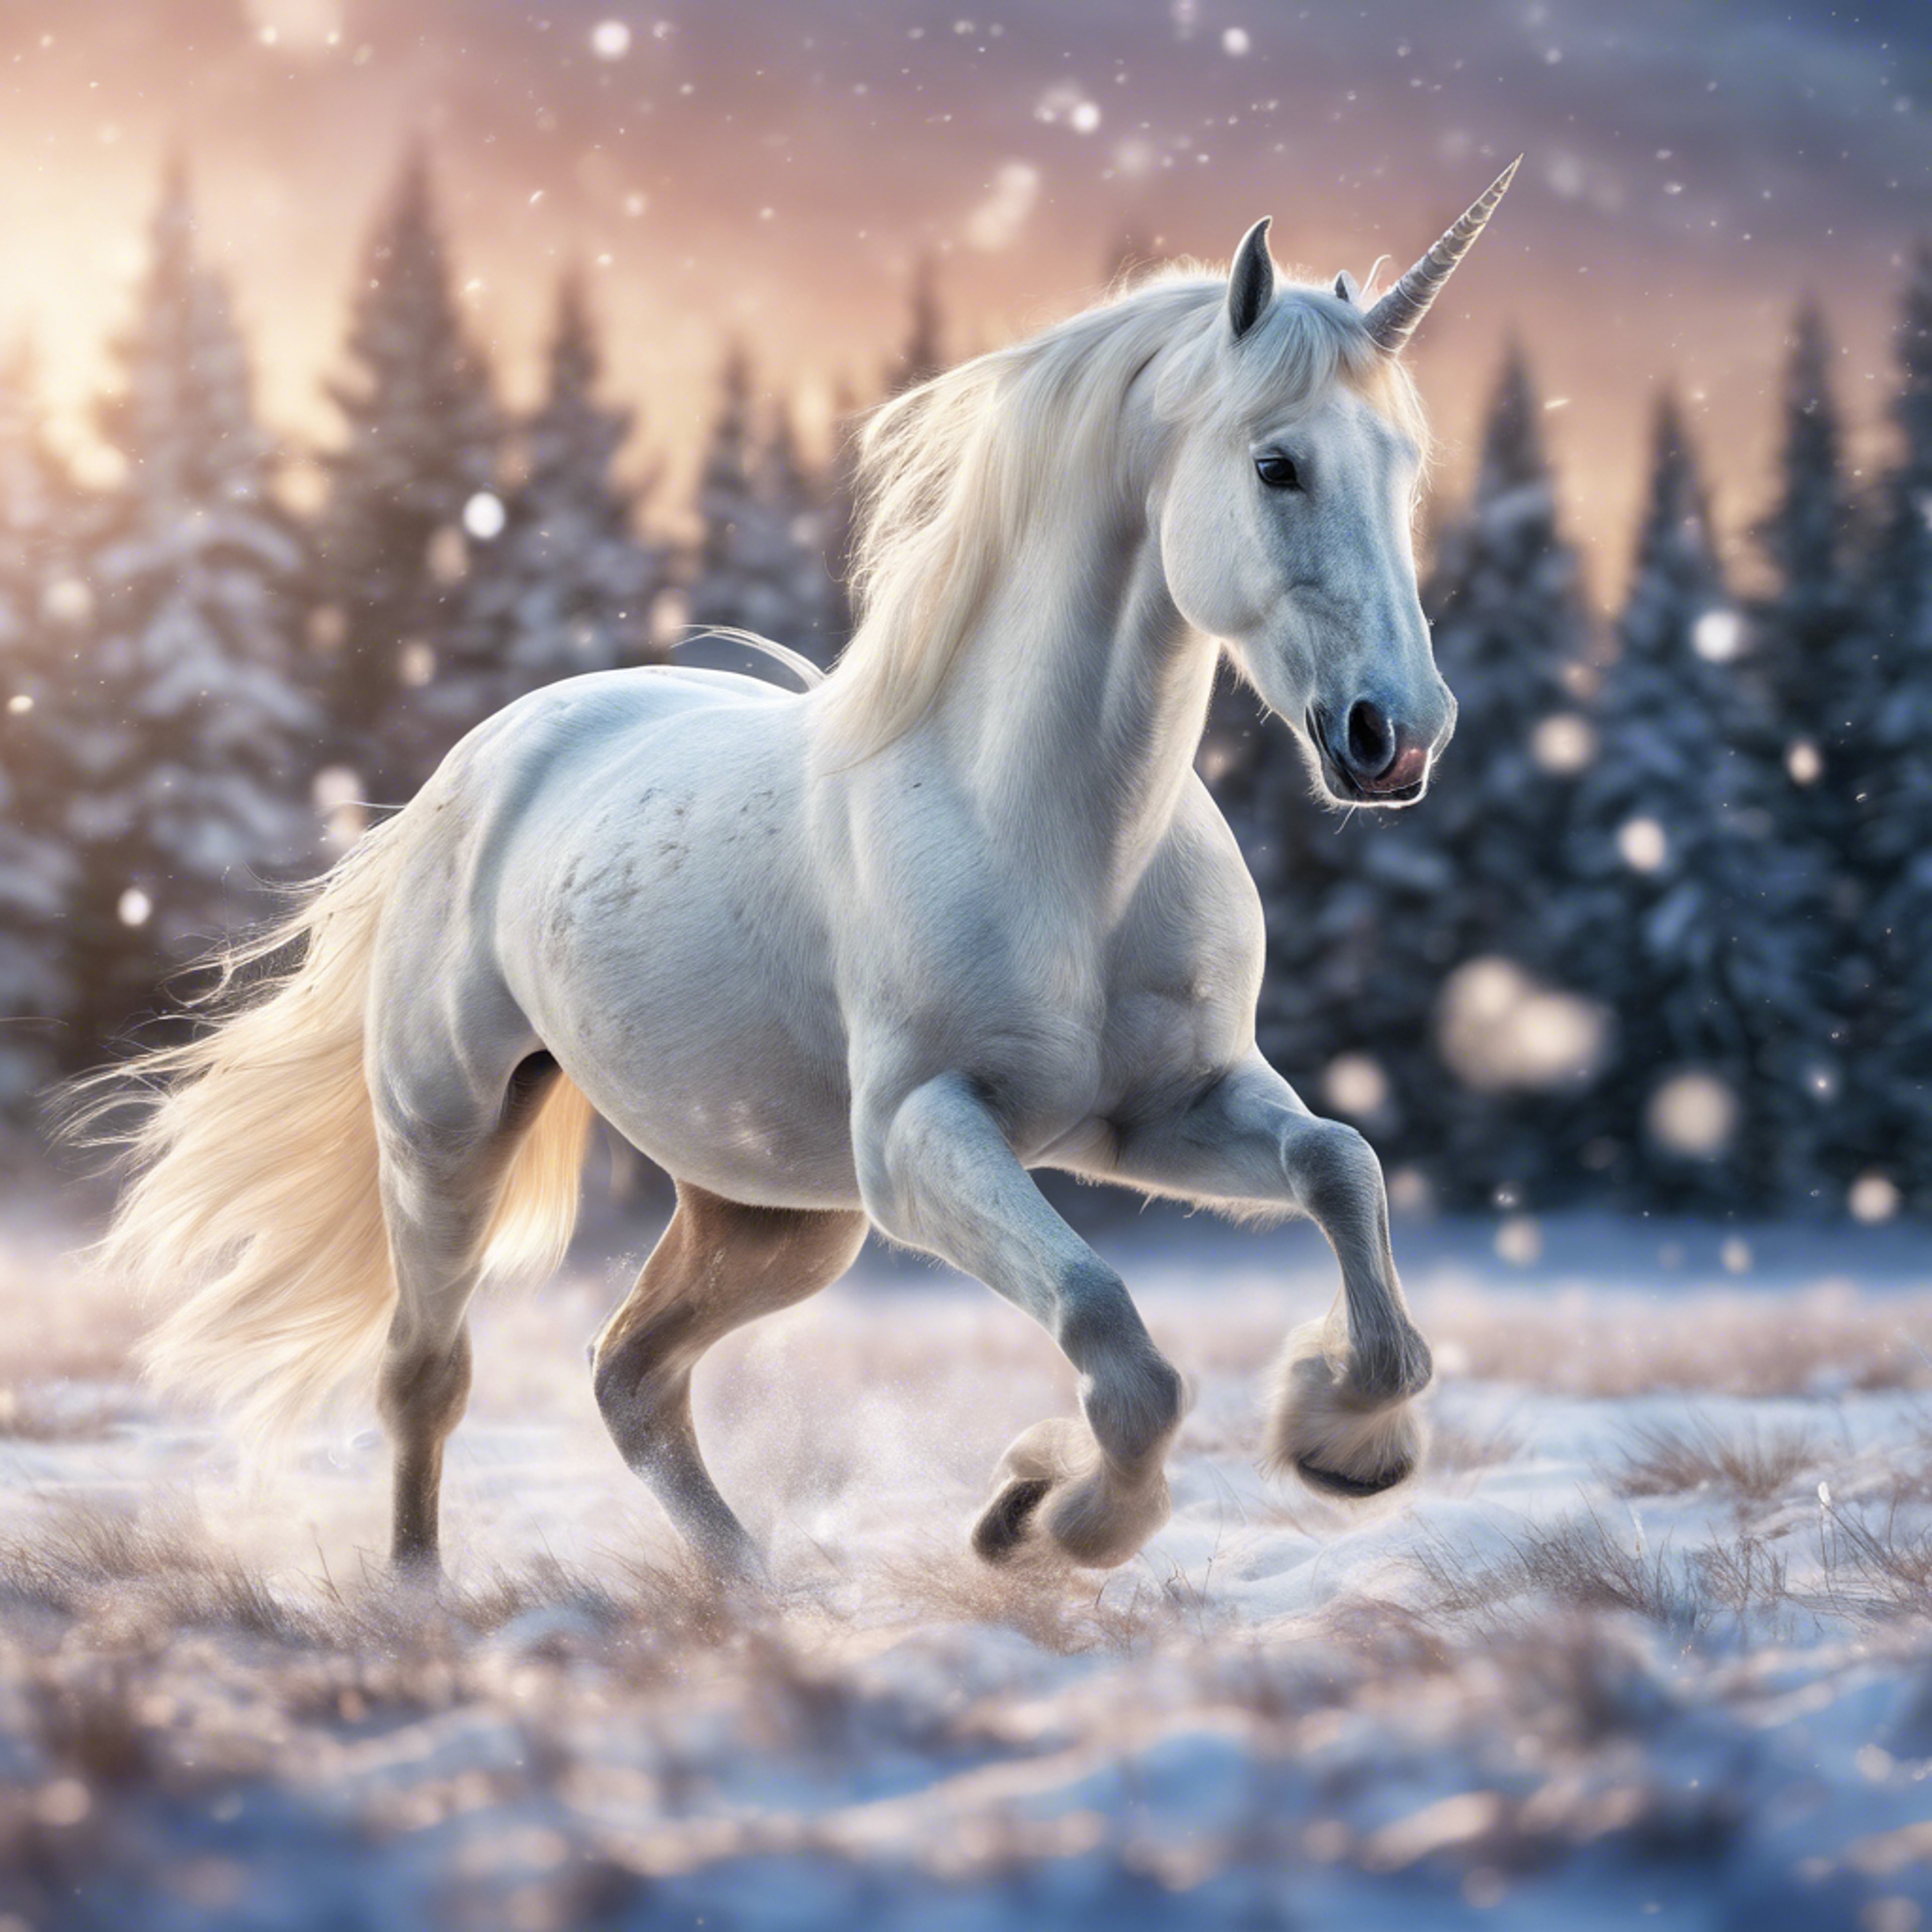 A dreamy image of a regal white unicorn galloping across a snow-covered meadow under the Northern lights.壁紙[4941f8504a9c44cebaa2]